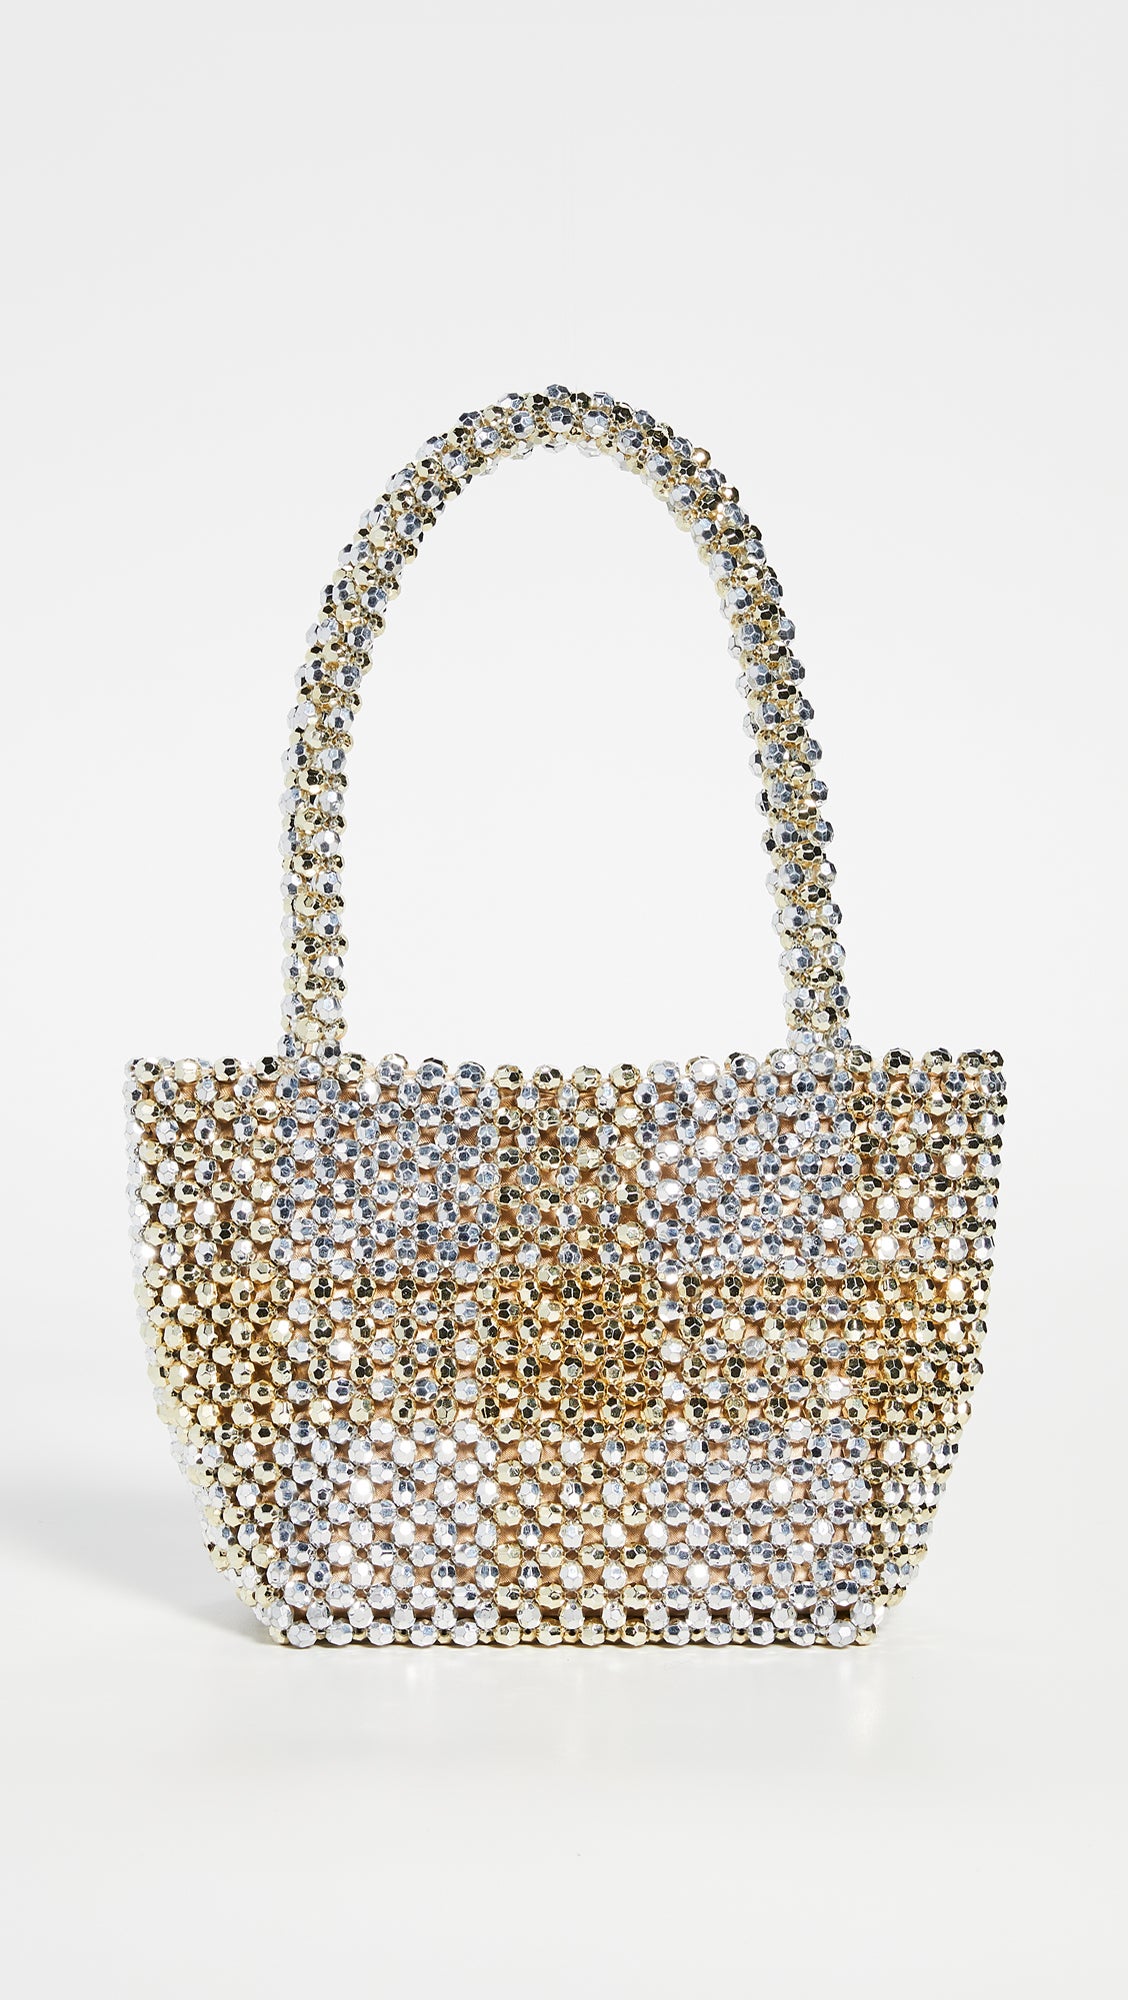 15 Sparkly Accessories That'll Light Up Any Room You Walk Into